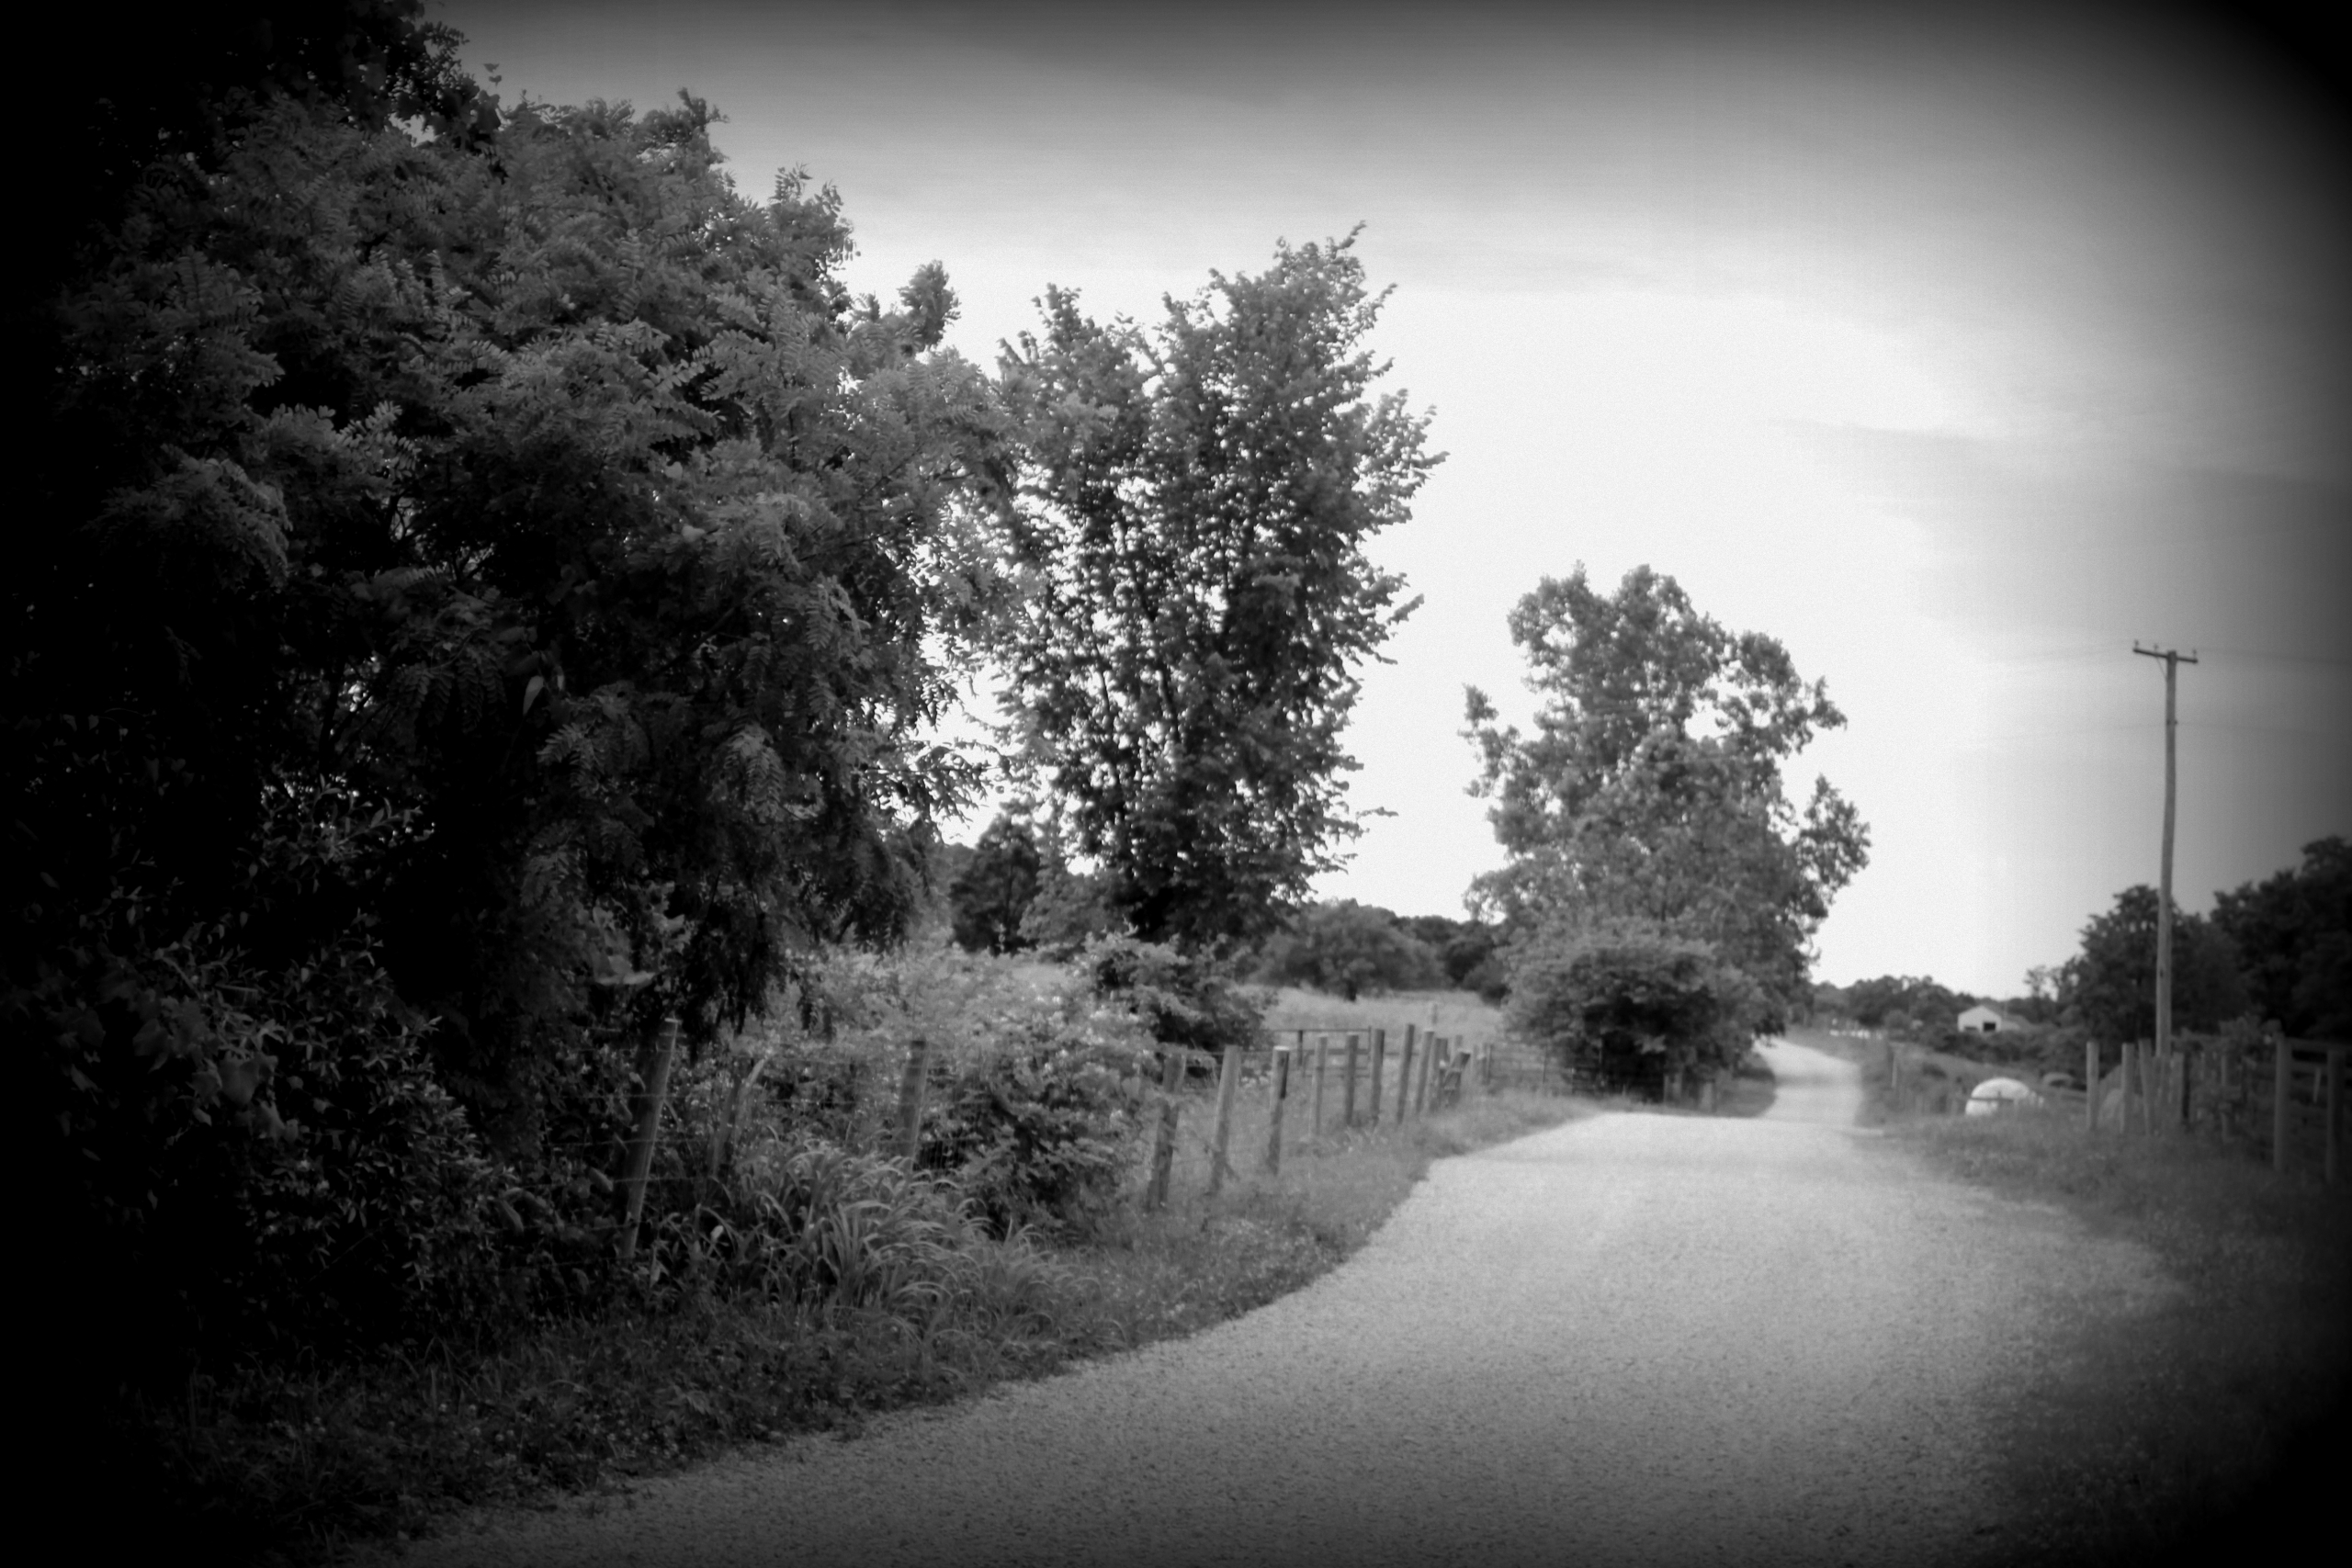 A country road leads past the haunt of the Screaming Lady of Mason County.